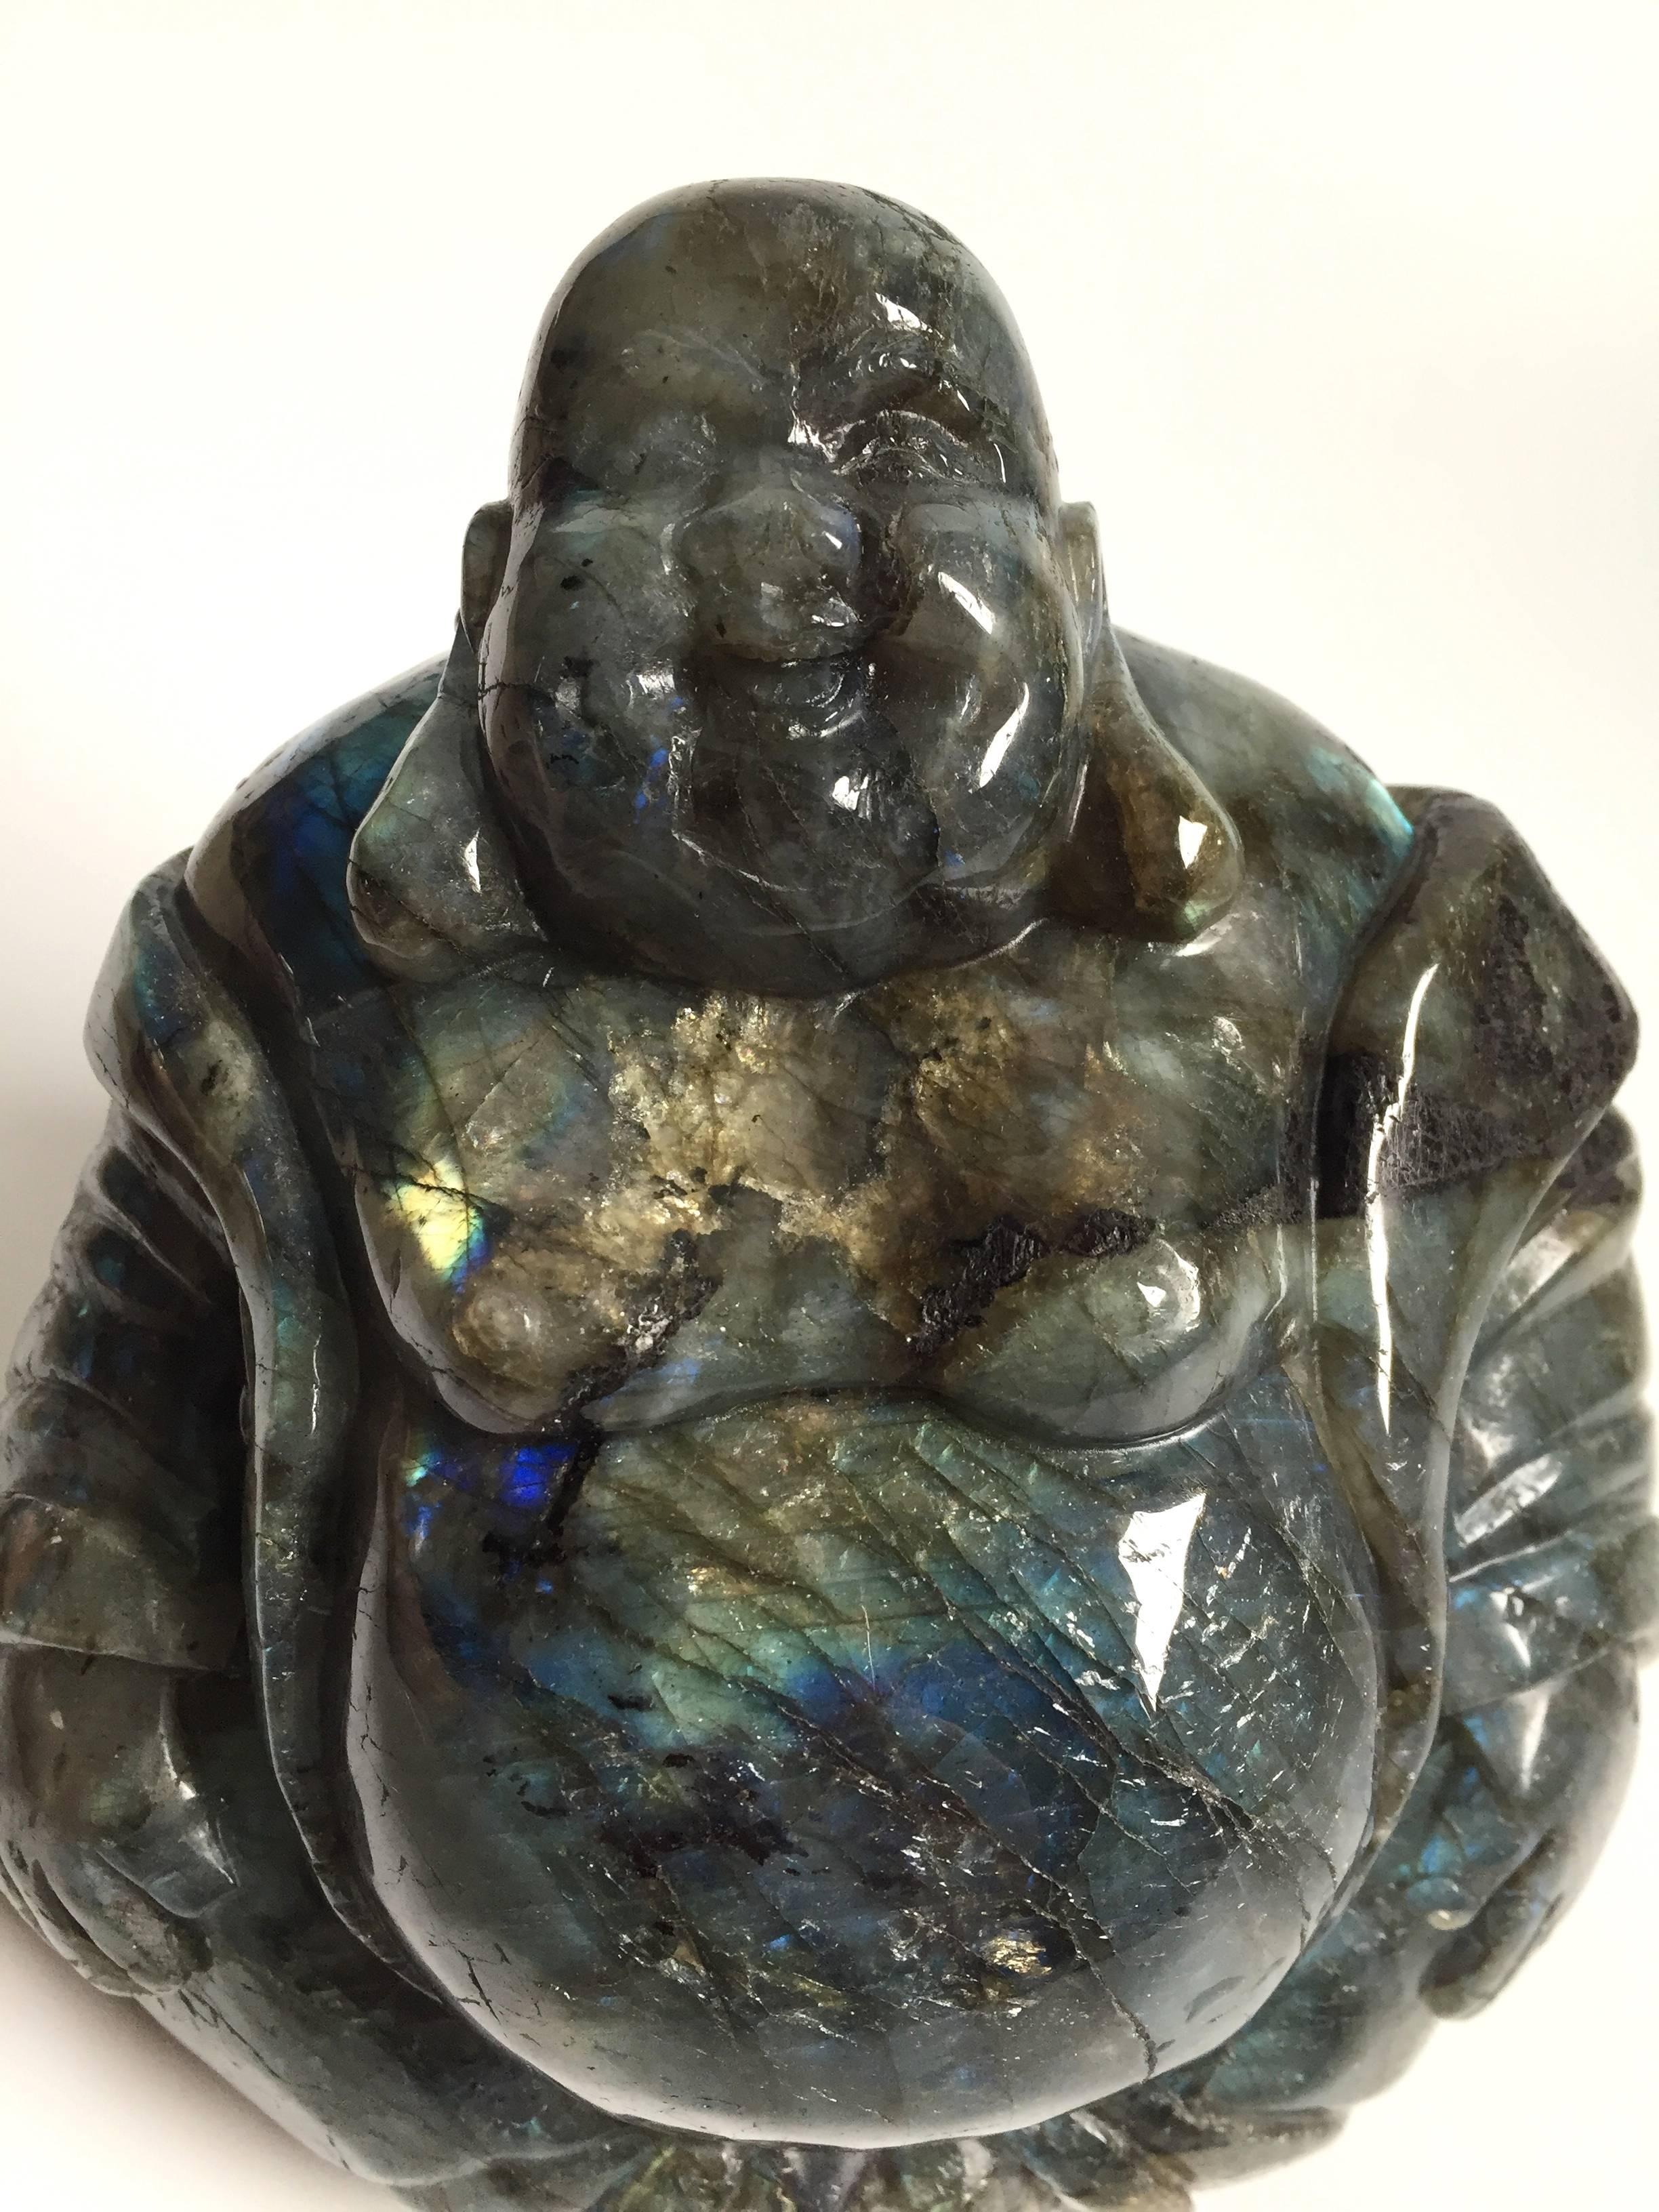 A fantastic labradorite Happy Buddha statue. The Buddha with round face, long earlobes and broad smile, wearing a loose robe that exposes the front of his bodice, a signature look of the worry free Happy Buddha. This spectacular piece is craved from